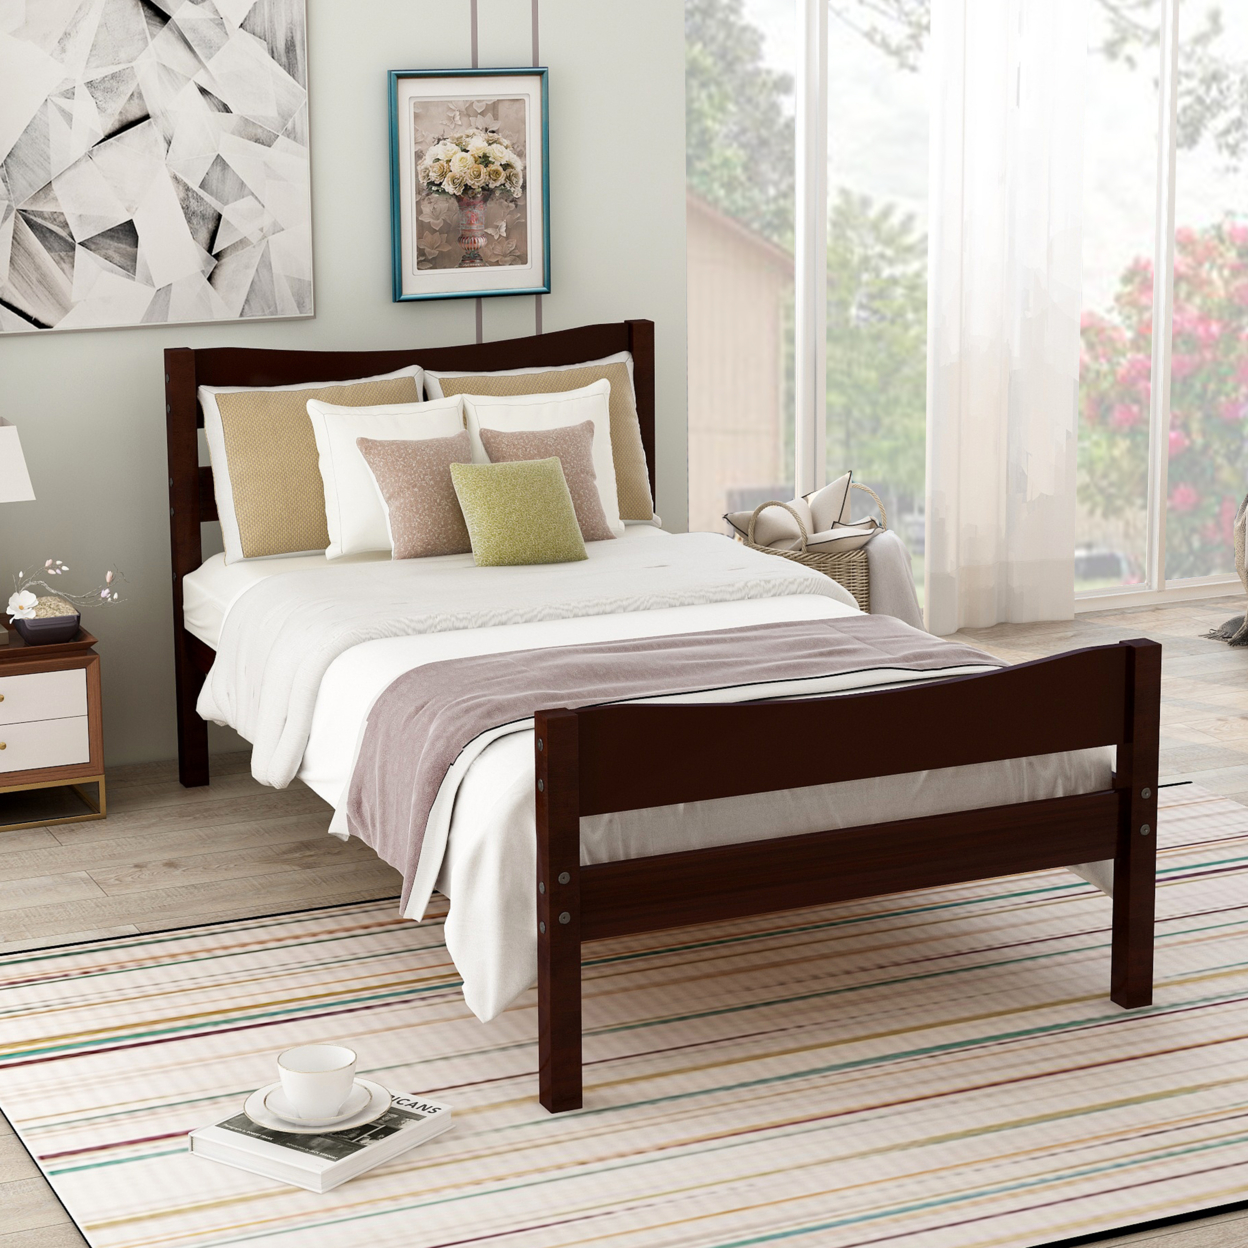 ï¿½ï¿½Not allowed to sell to Walmartï¿½ï¿½Twin Size Wood Platform Bed with Headboard and Wooden Slat Support (Espresso)